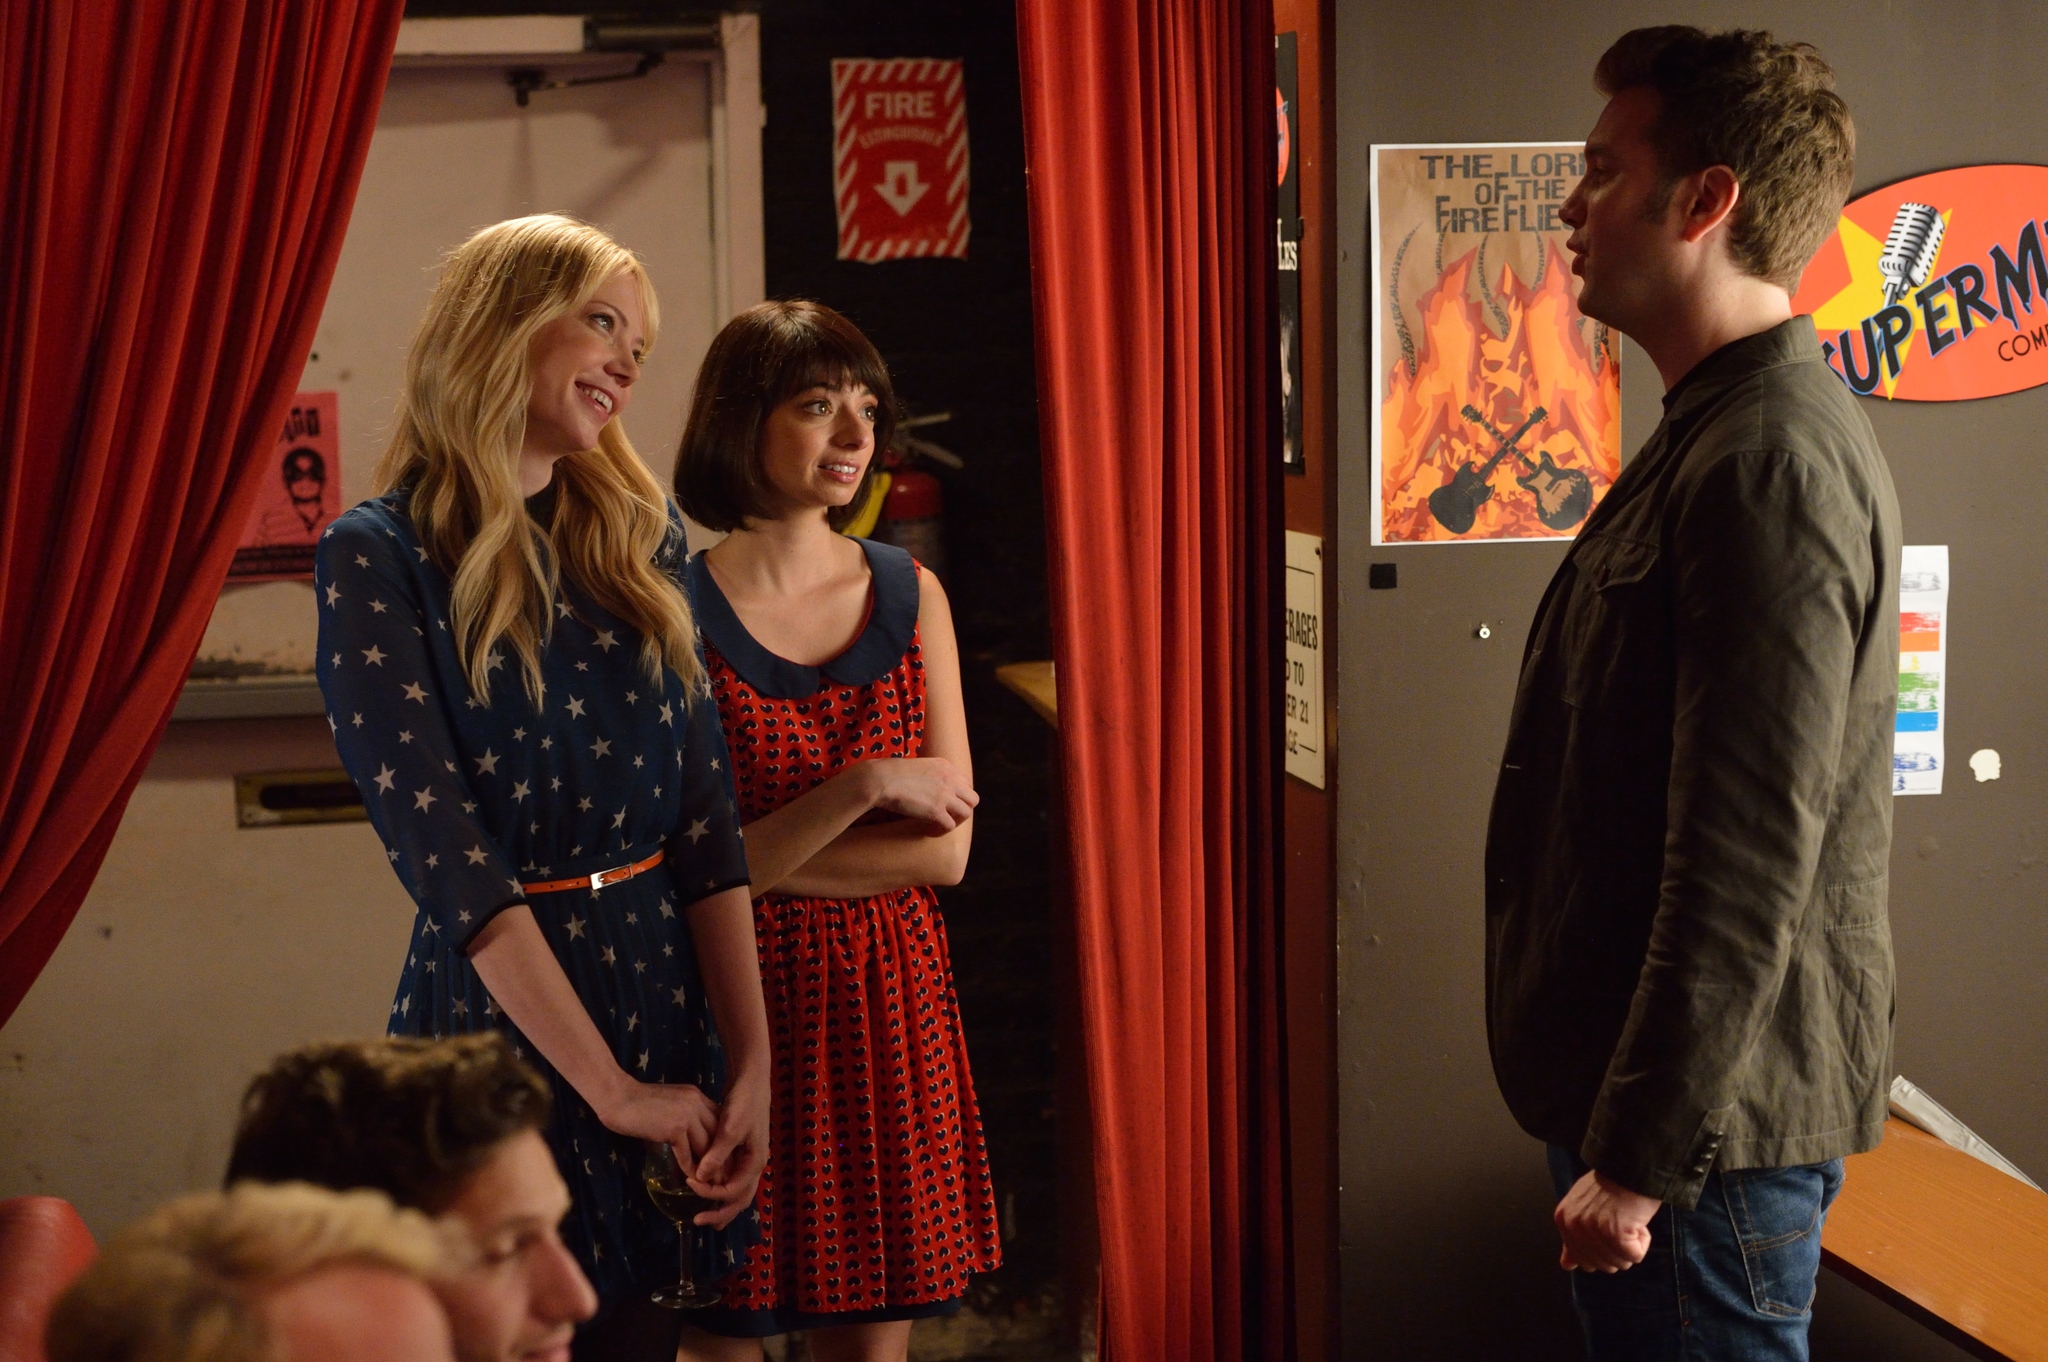 Still of Riki Lindhome, Kate Micucci and Anthony Jeselnik in Garfunkel and Oates (2014)